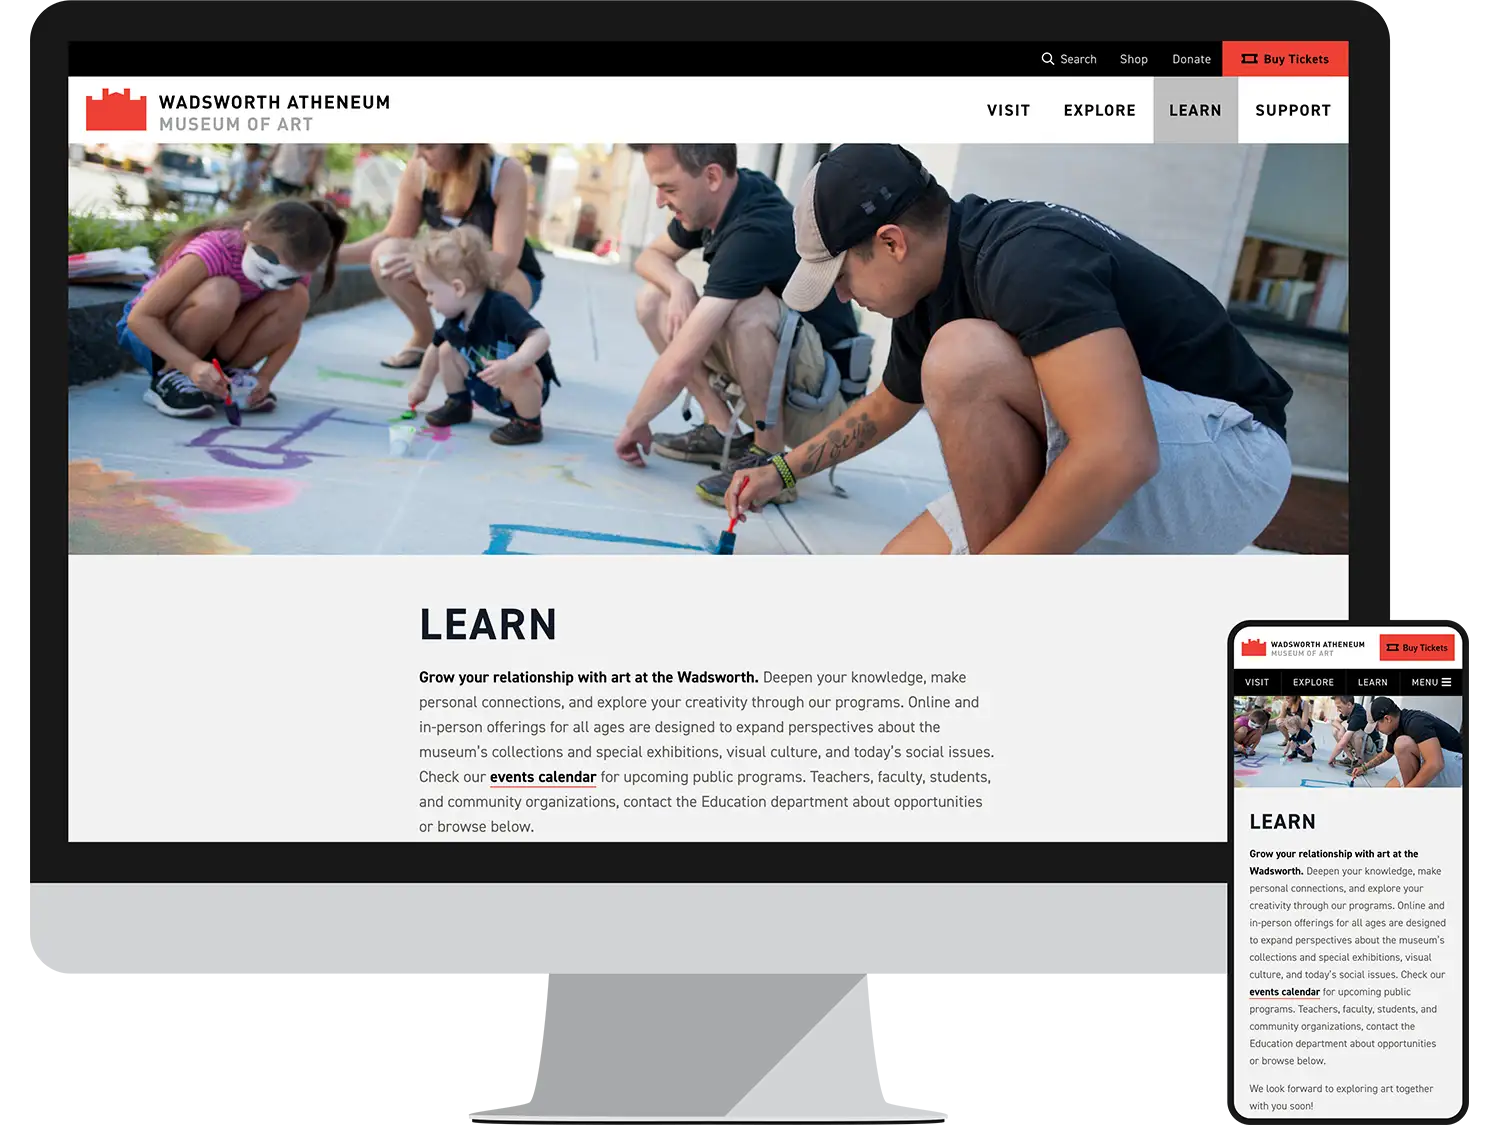 Landing Page - Learn